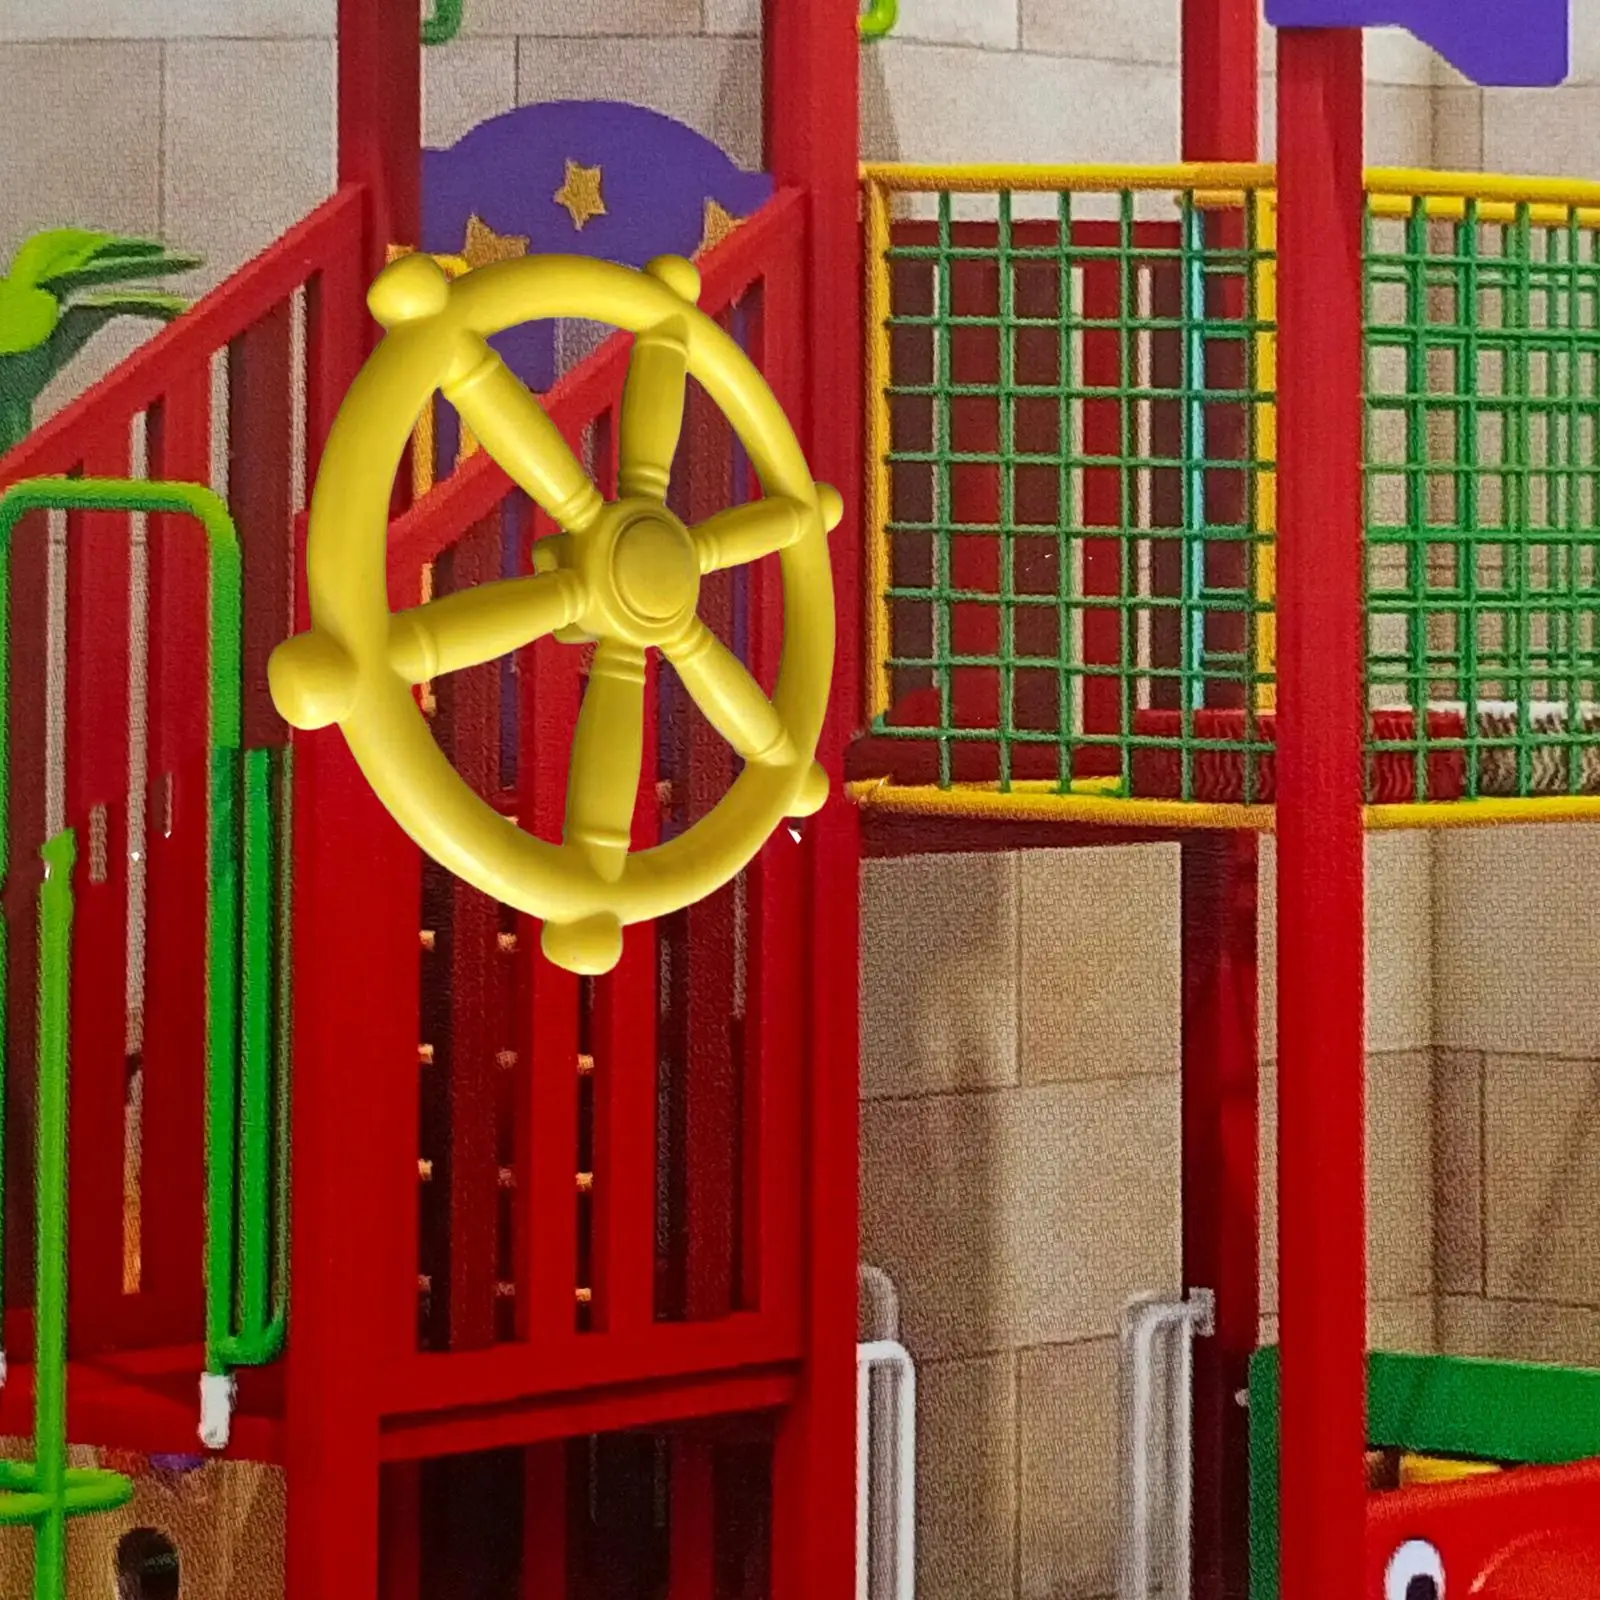 Pirate Ship Wheel Backyard Playset Equipment Jungle Gym Steering Wheel for Park Play House Treehouse Amusement Park Outdoor